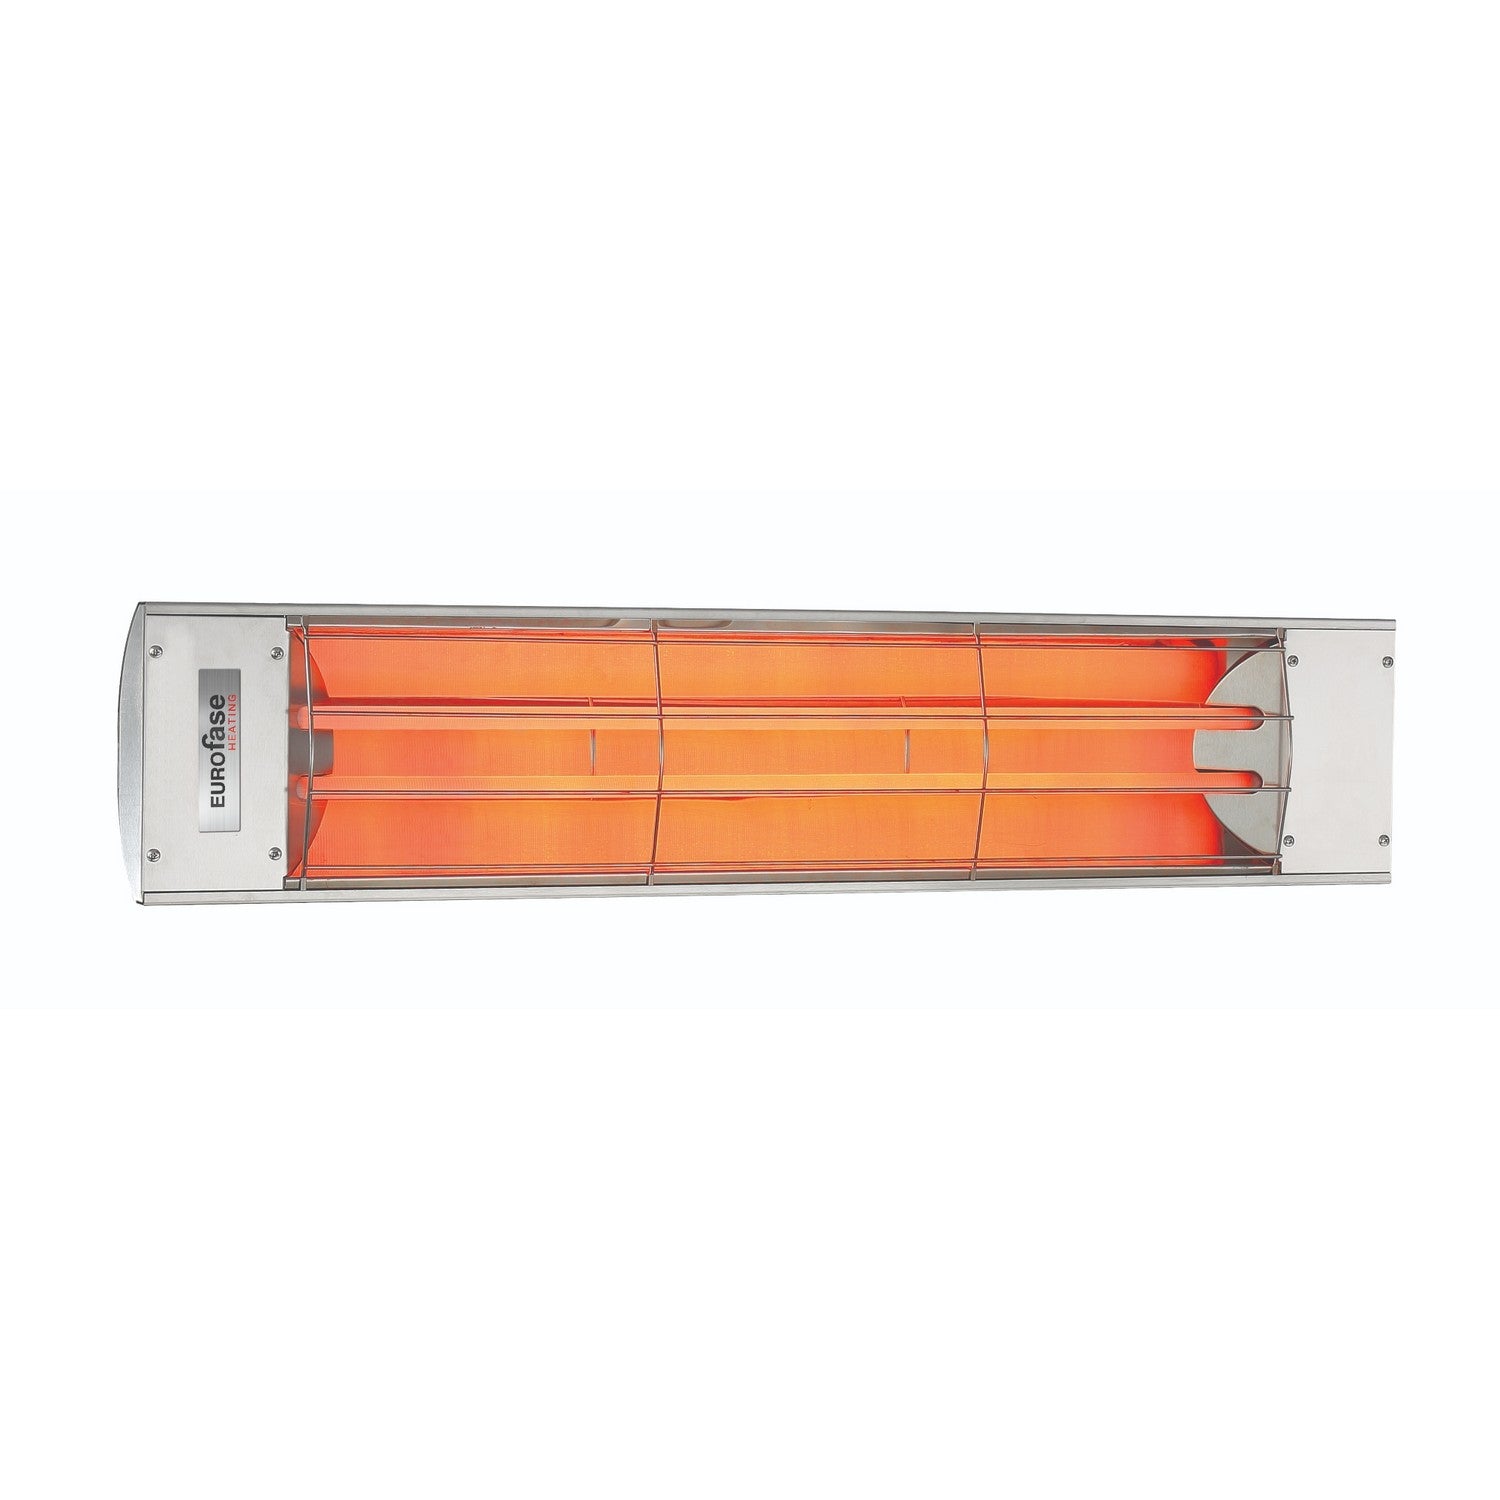 Eurofase - EF50480S - Electric Heater - Stainless Steel